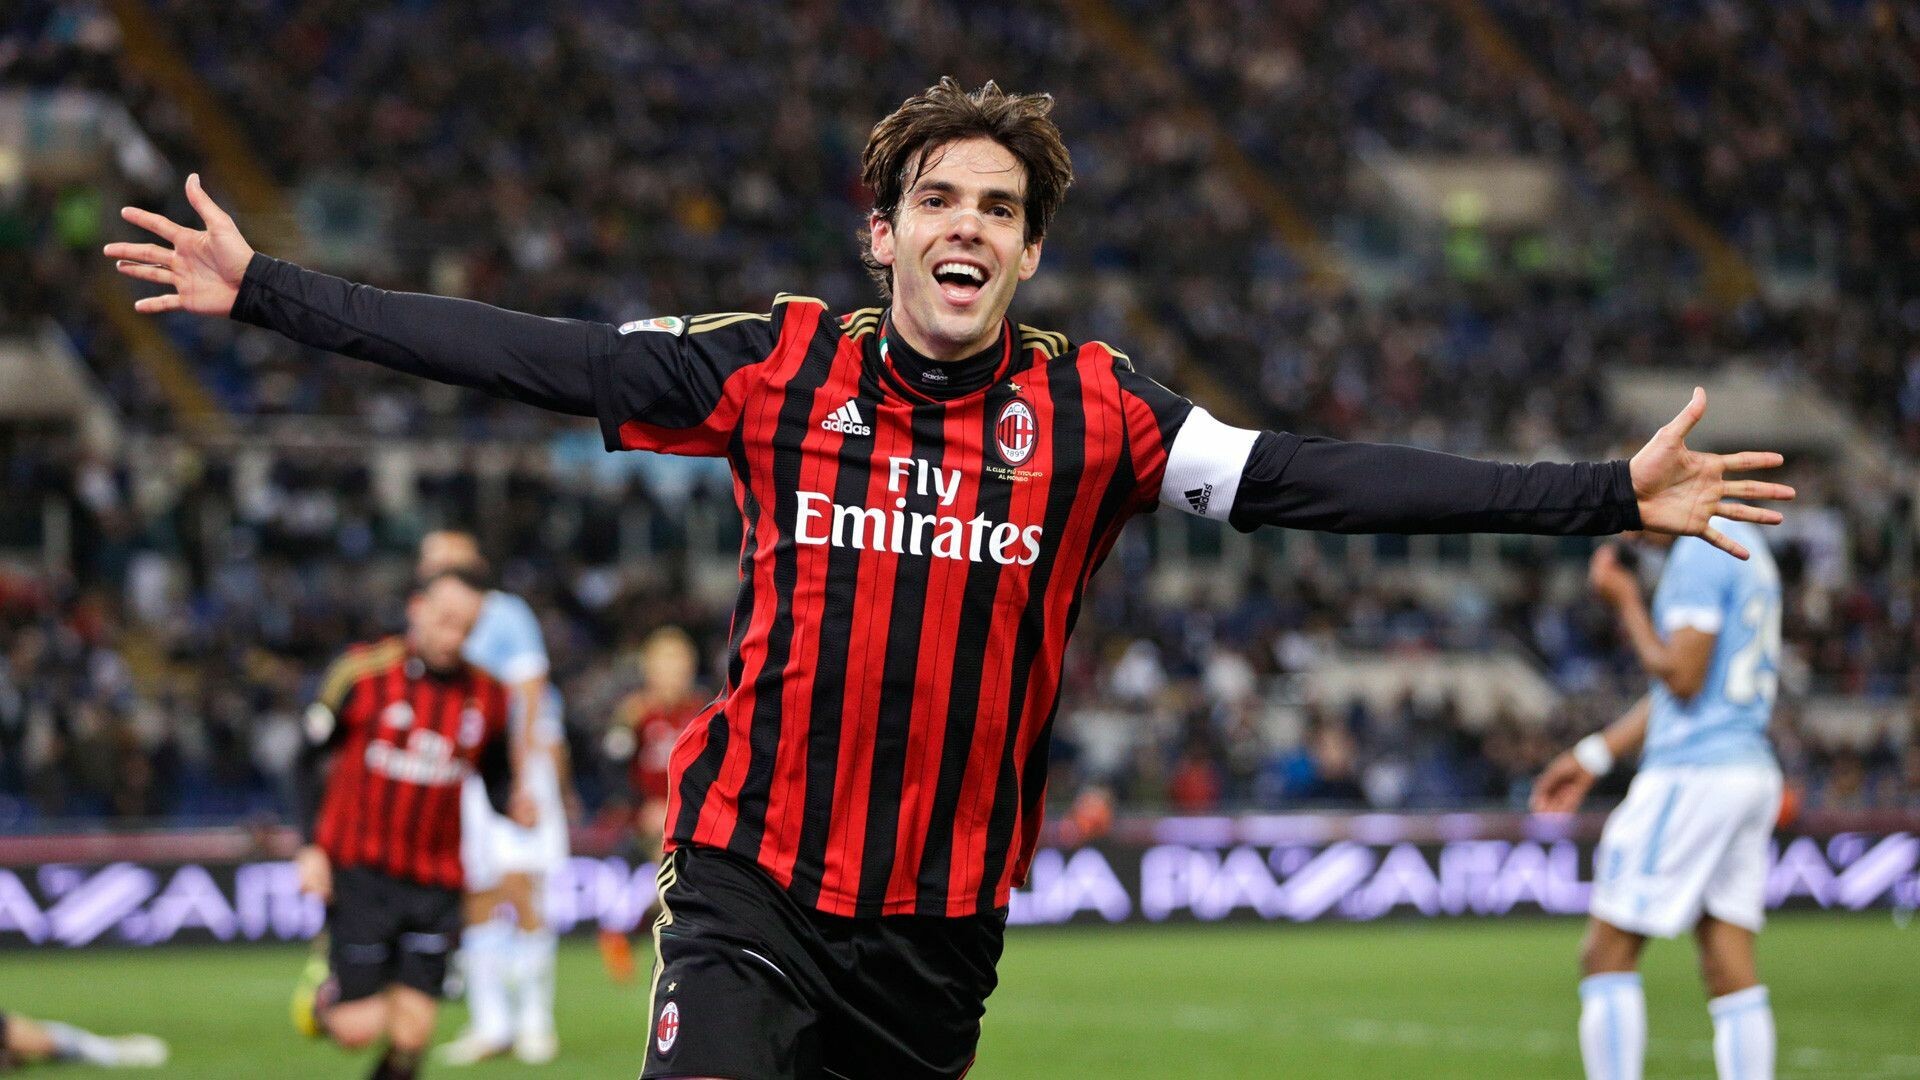 Kaká: Won the Golden Ball Award in 2009 as the FIFA Confederations Cup best player. 1920x1080 Full HD Wallpaper.